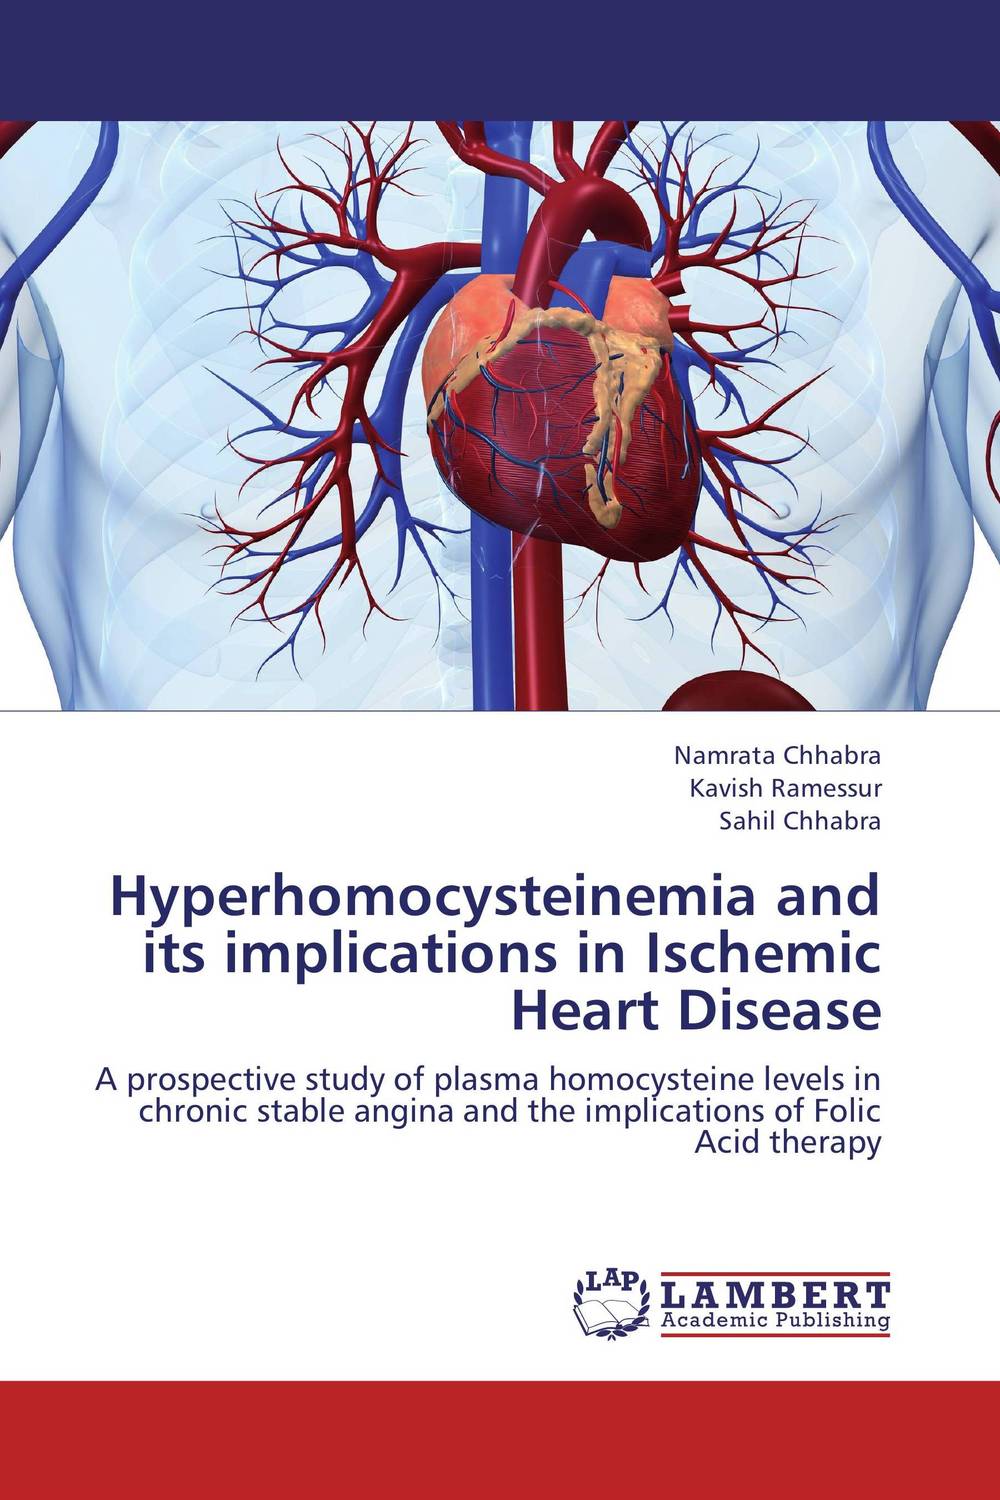 Hyperhomocysteinemia and its implications in Ischemic Heart Disease